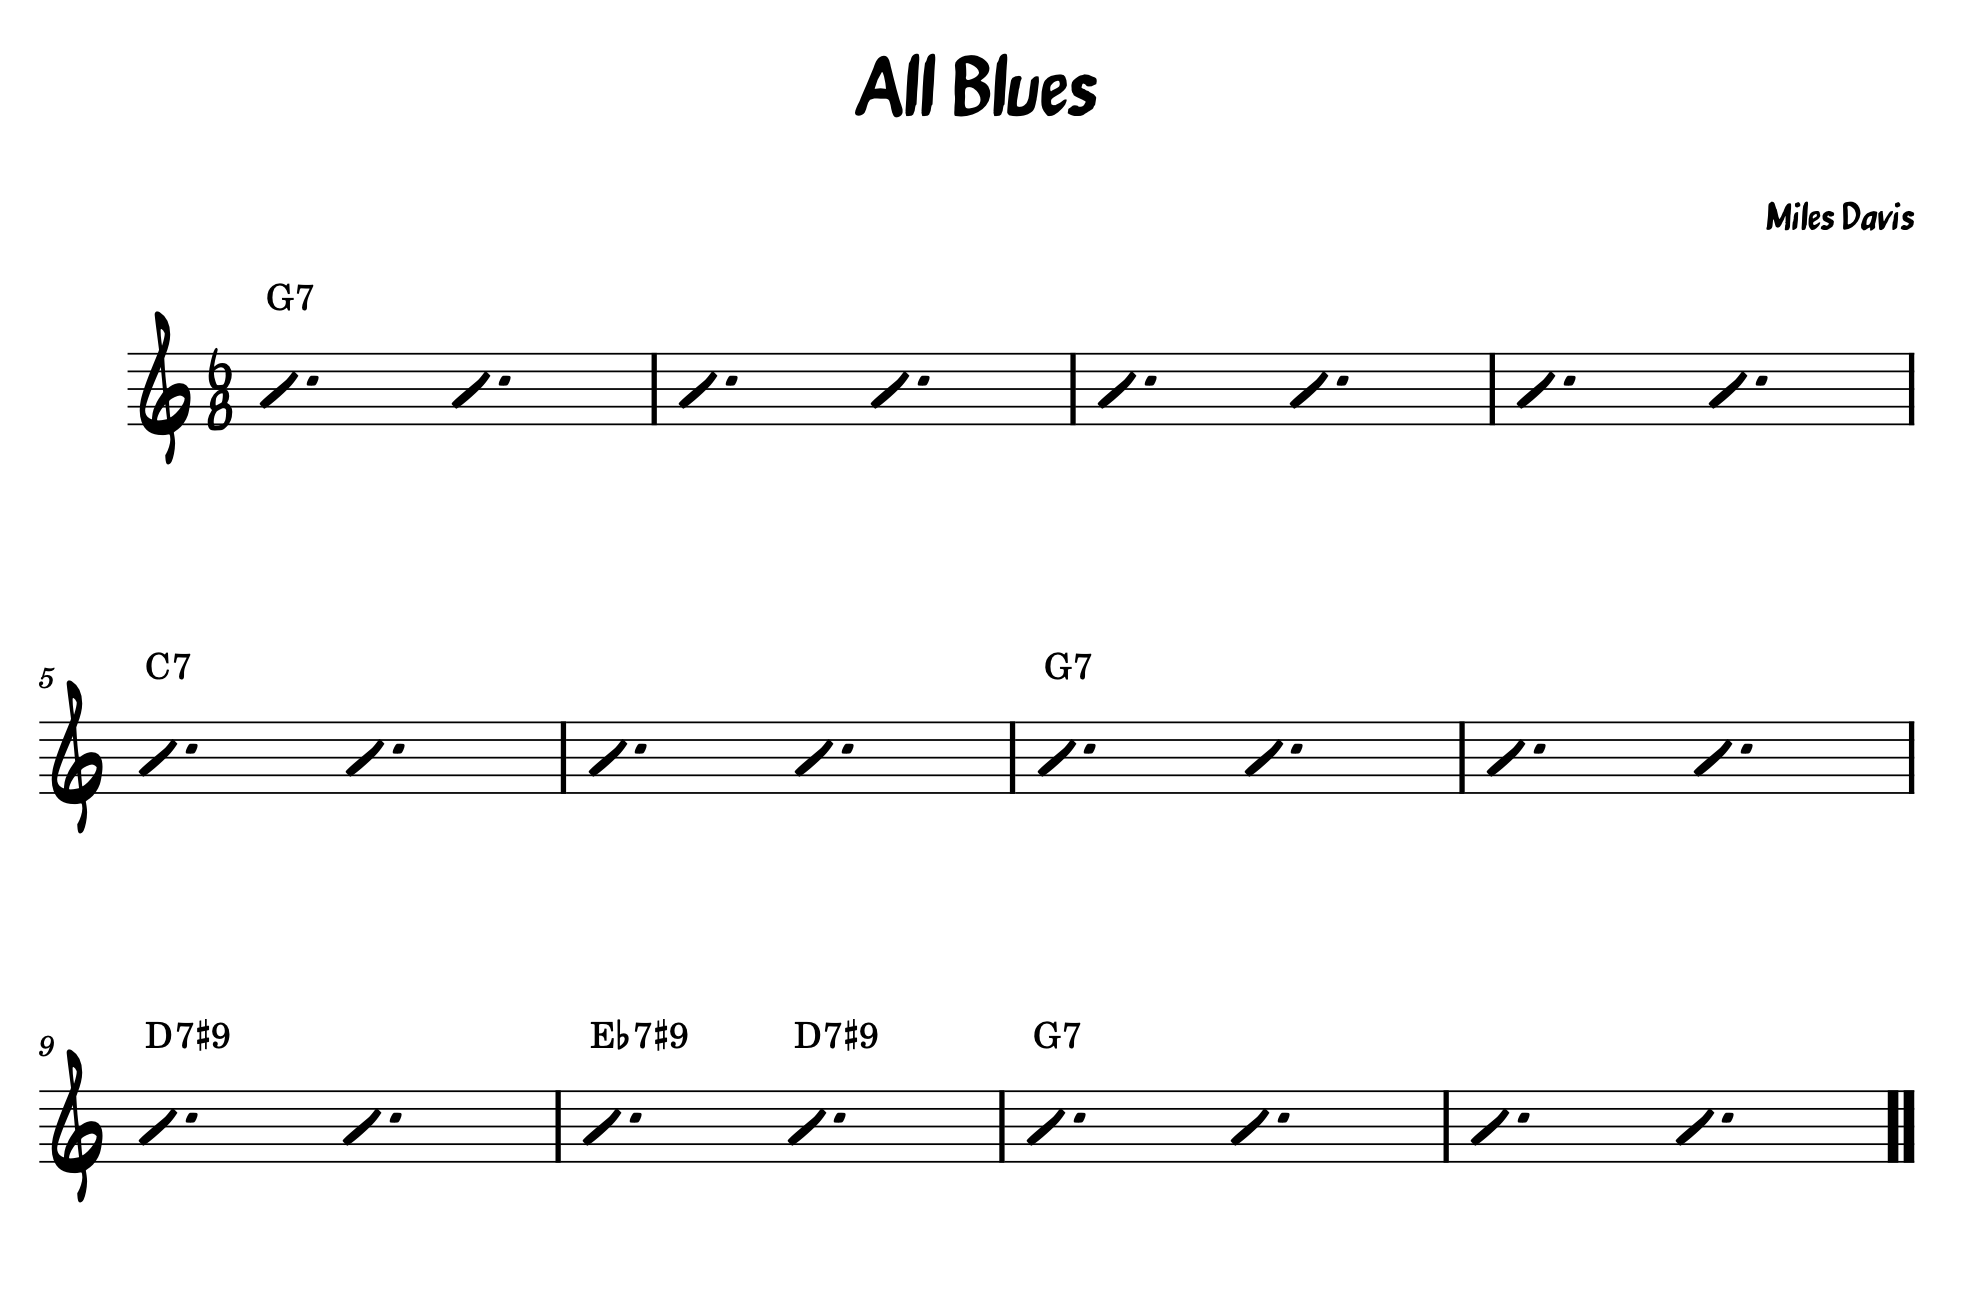 Lead Sheet For Miles Davis's All Blues